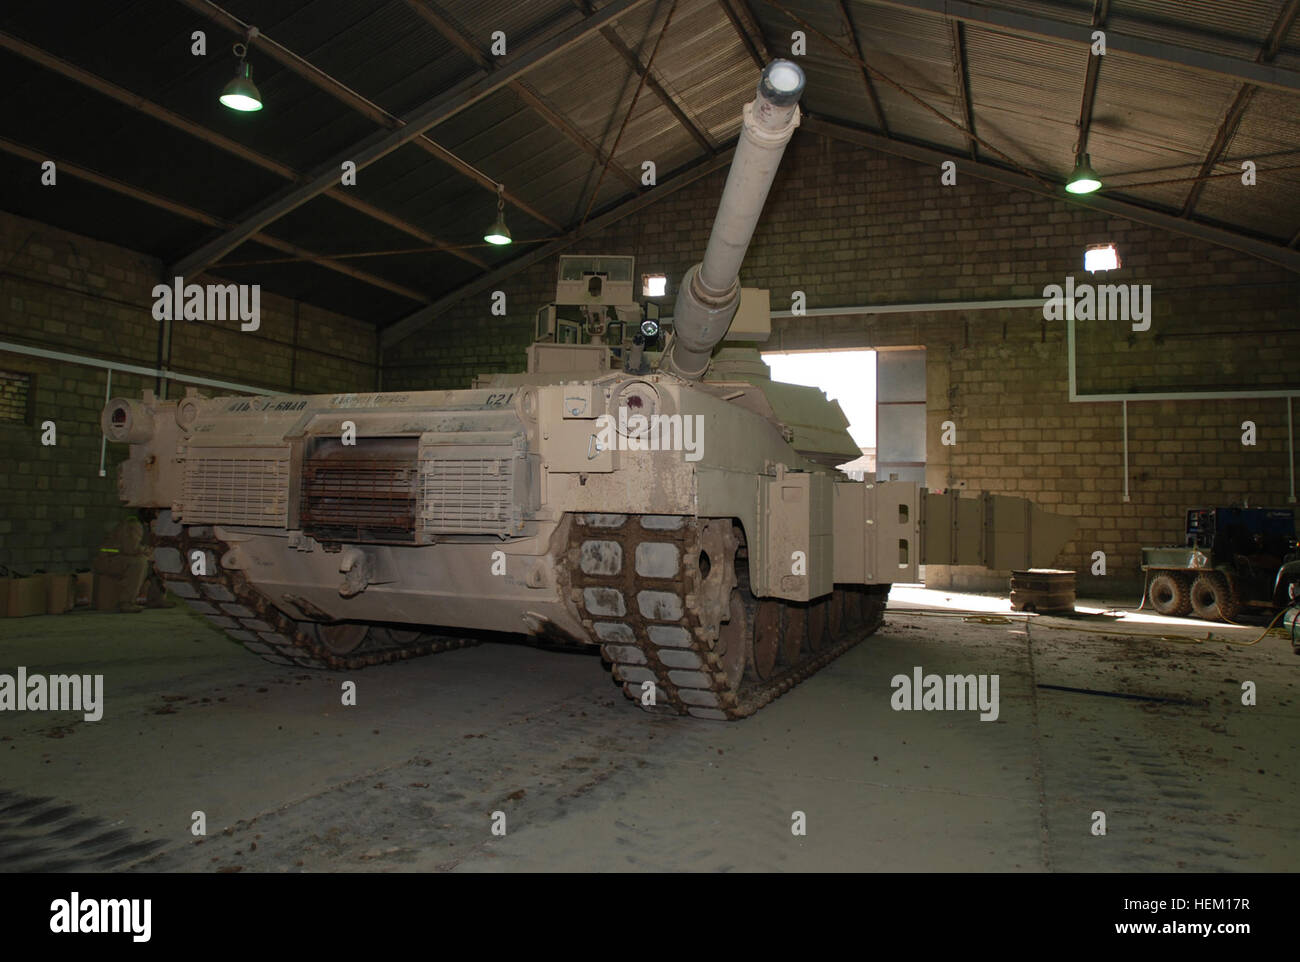 an-m1-a2-abrams-tank-is-in-a-warehouse-being-upgraded-for-soldiers-HEM17R.jpg